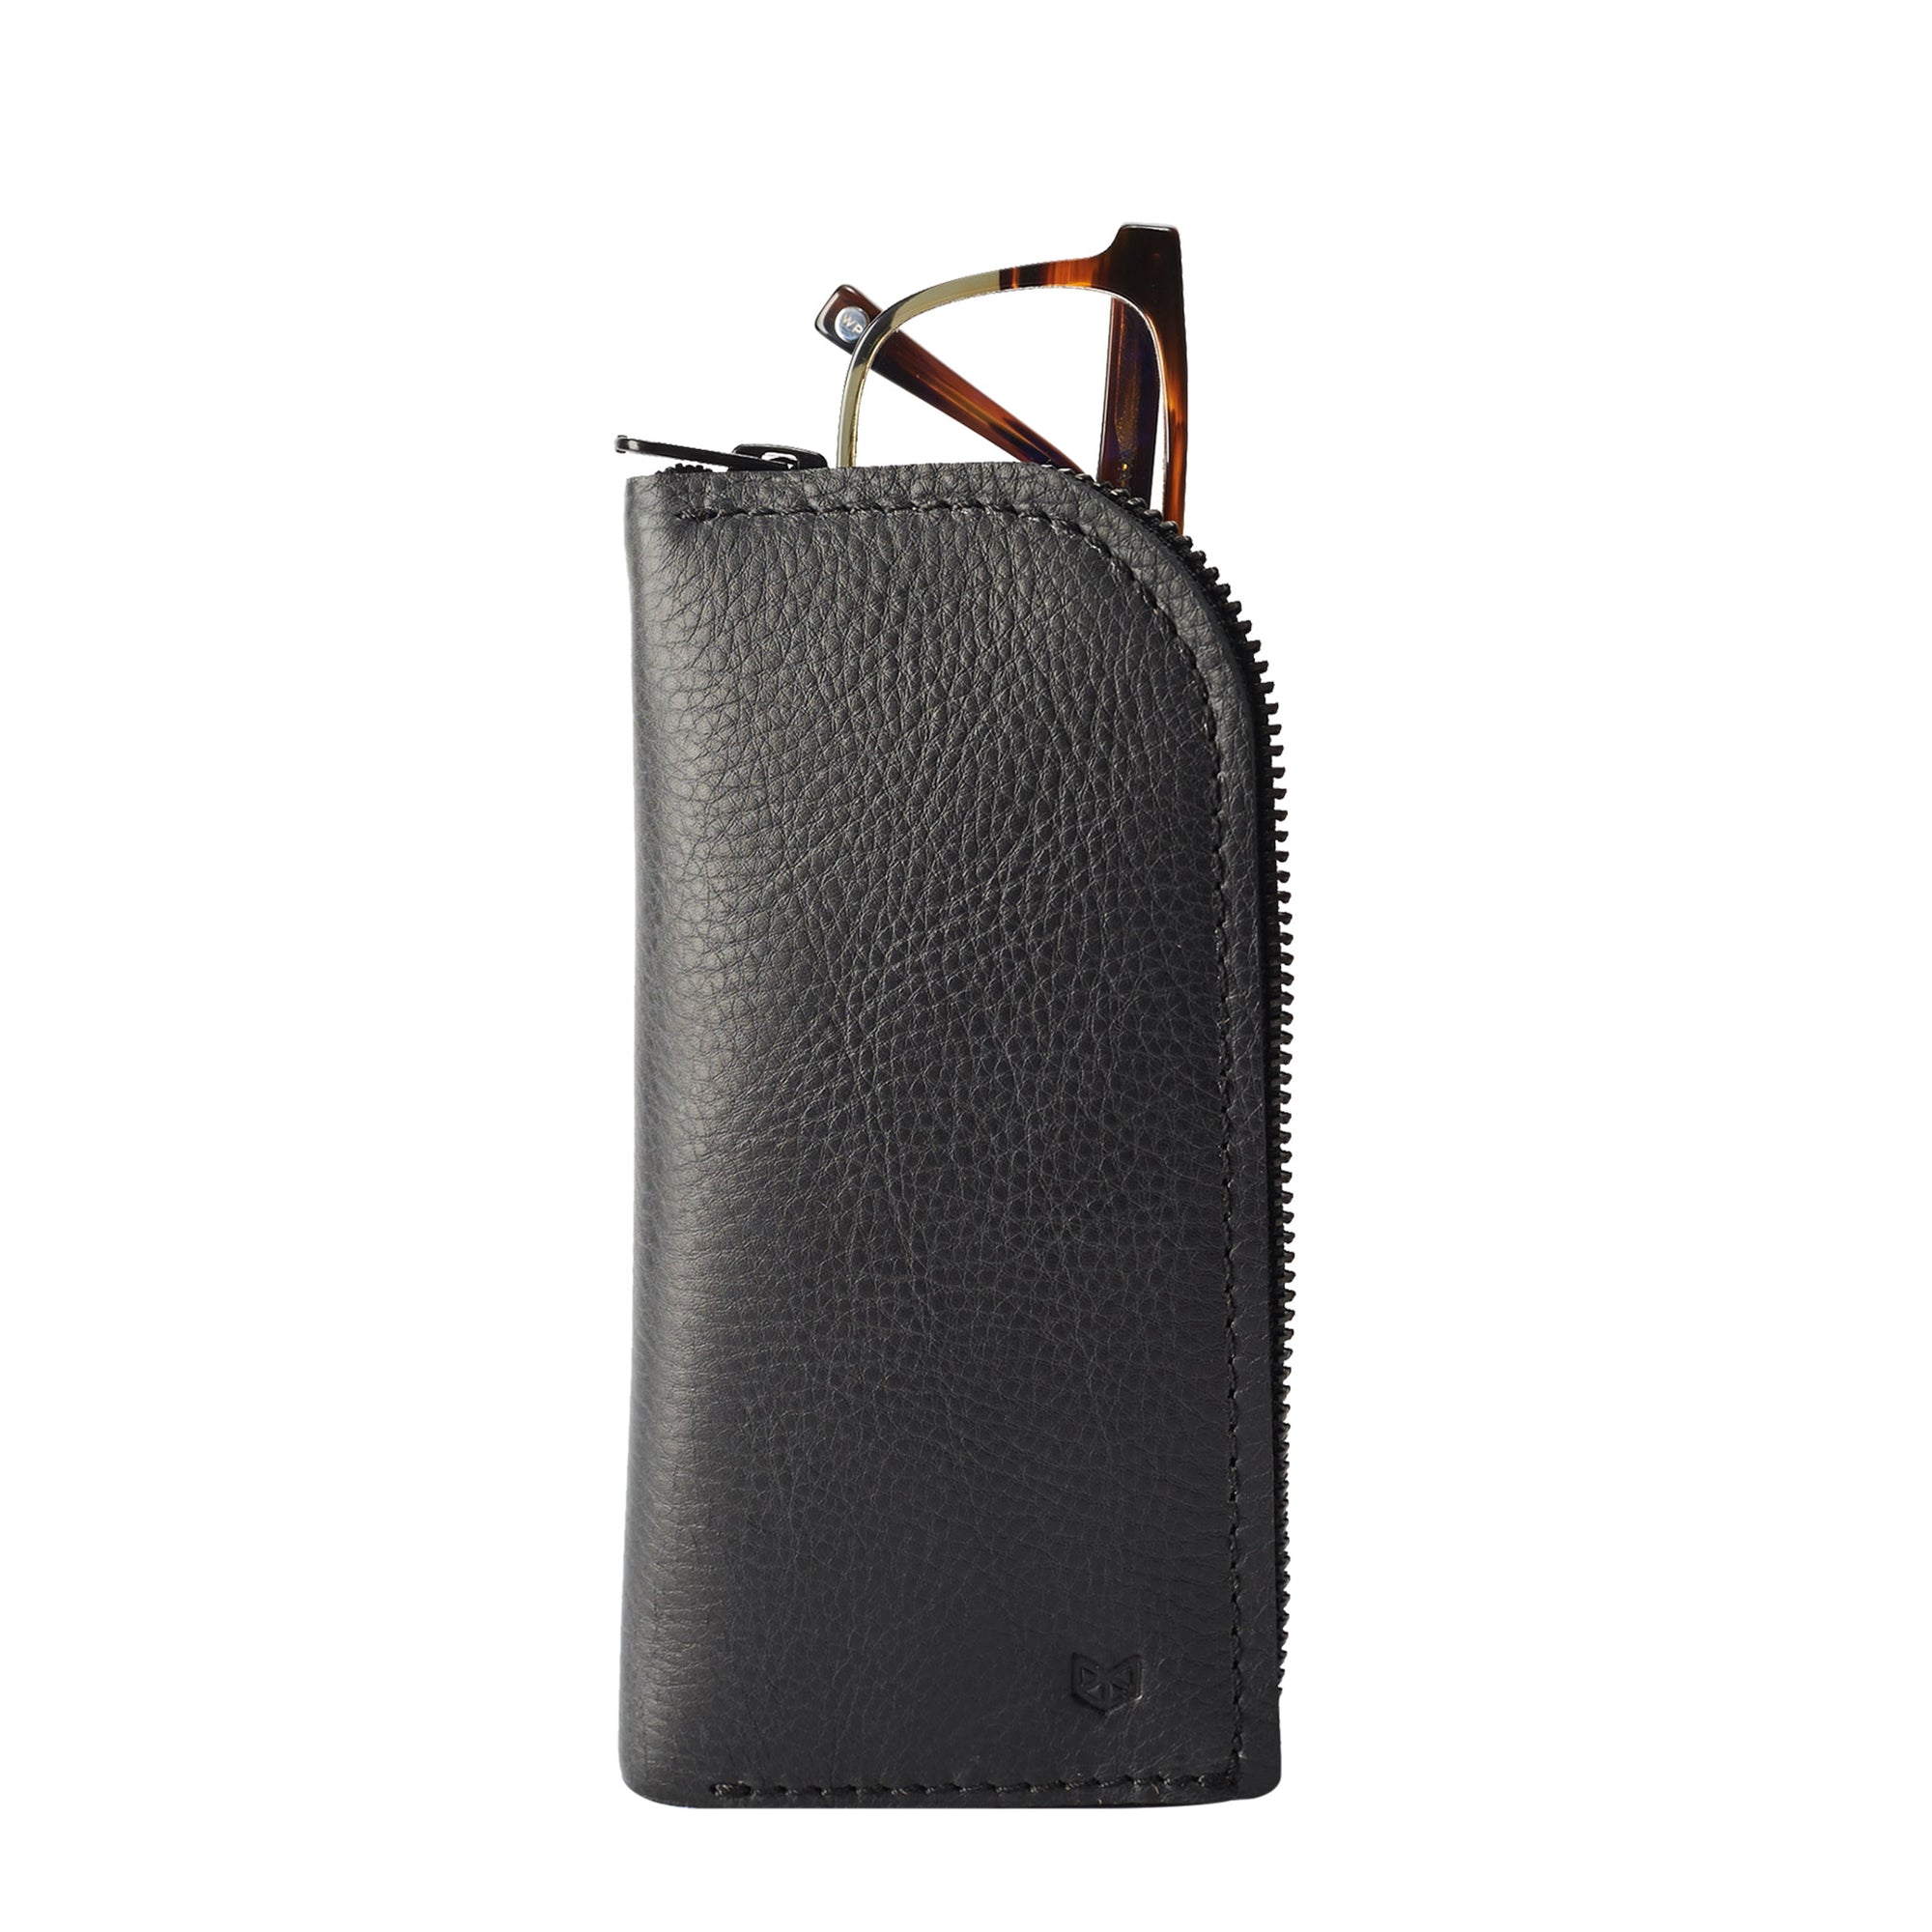 Gifts for men. Black leather Glasses case, sunglasses case, hand stitched leather sleeve for reading glasses